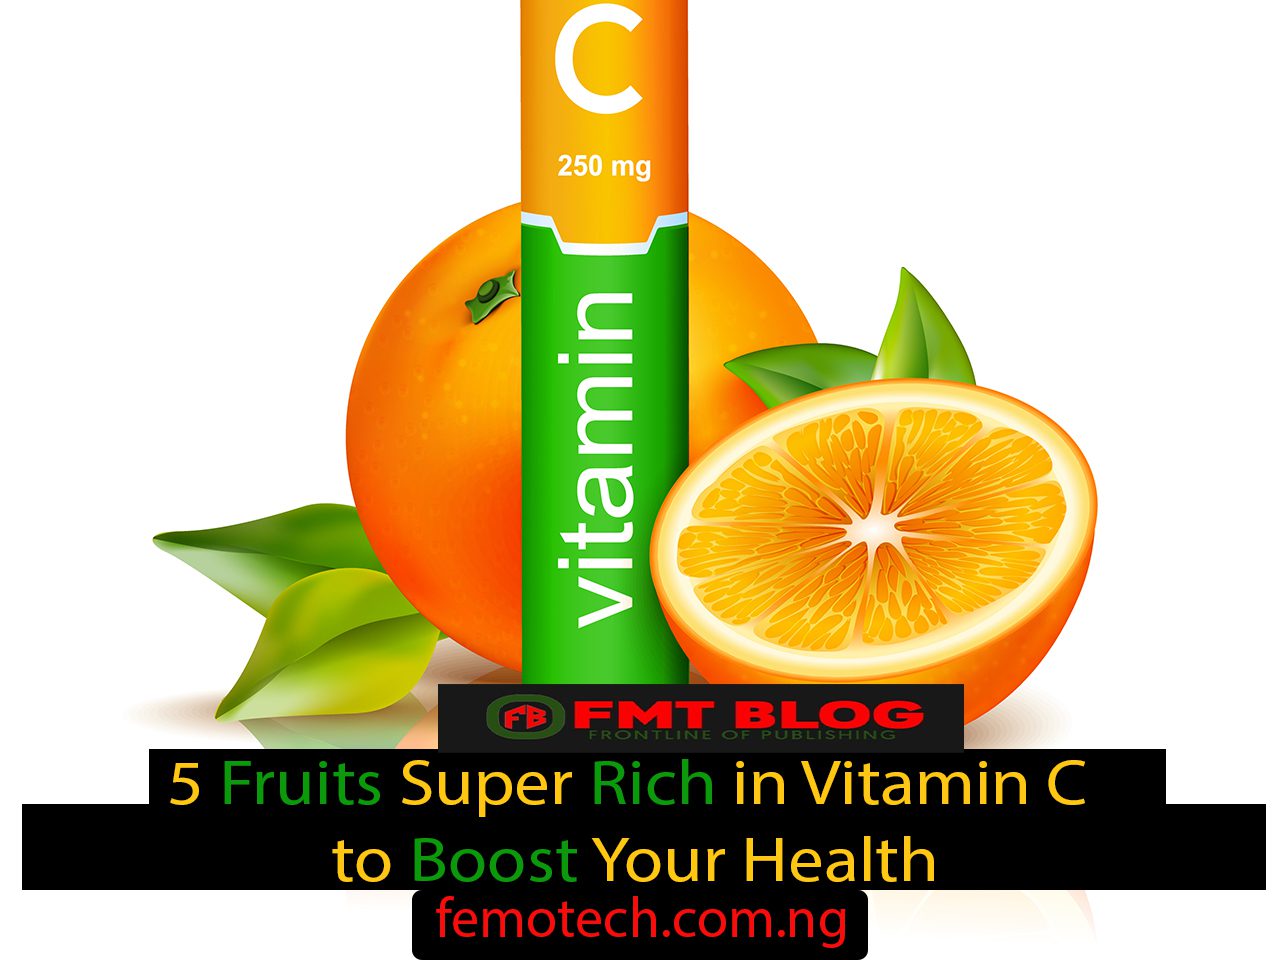 5 Fruits Super Rich in Vitamin C to Boost Your Health